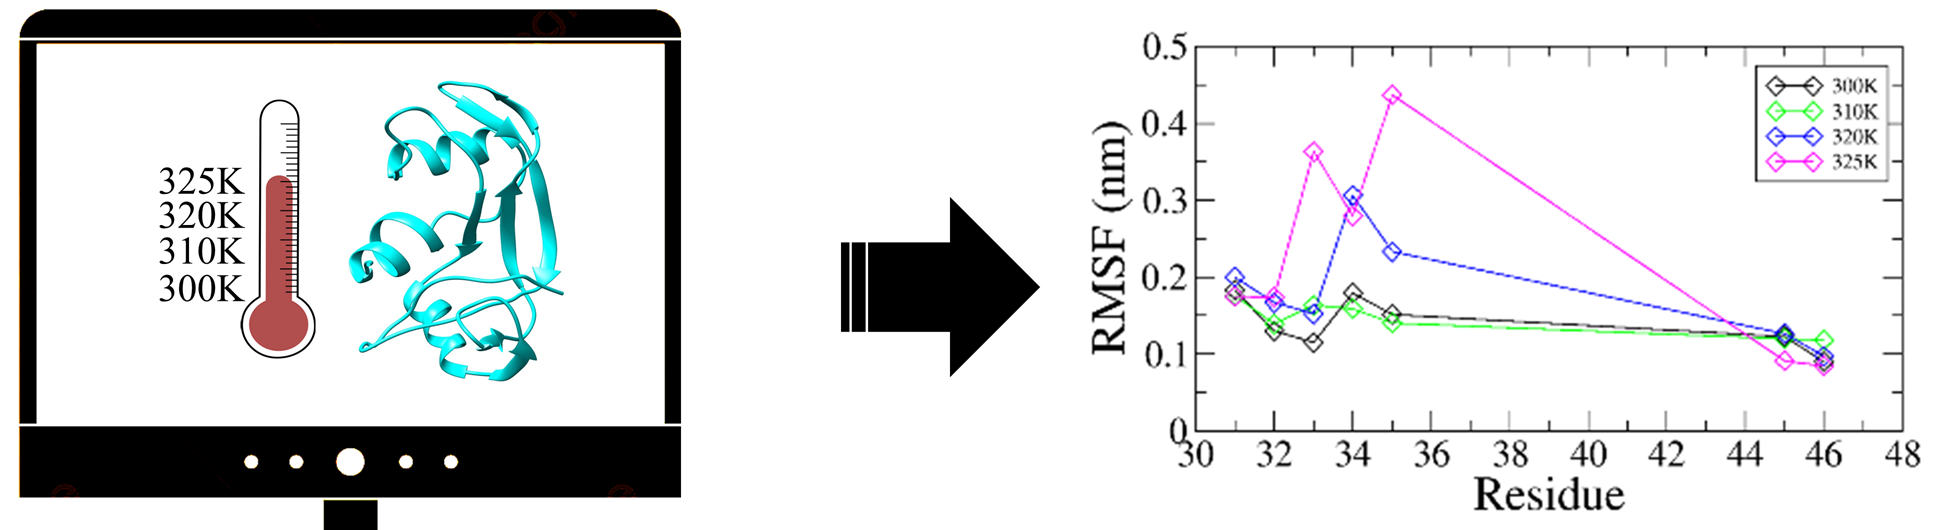 RNase A simulations at different temperatures